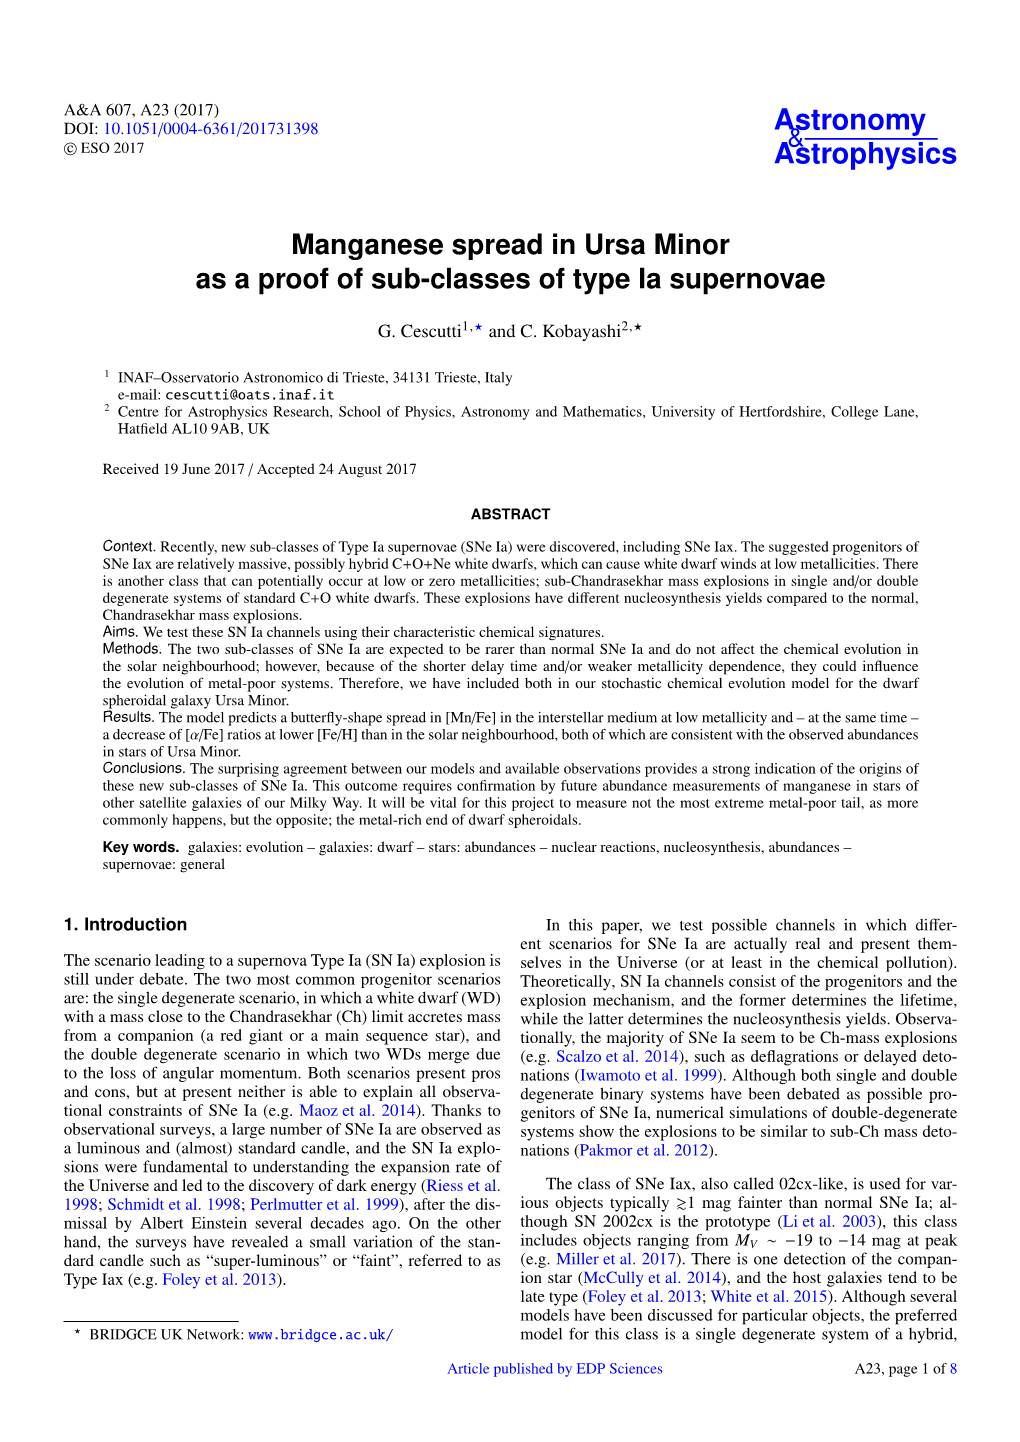 Manganese Spread in Ursa Minor As a Proof of Sub-Classes of Type Ia Supernovae